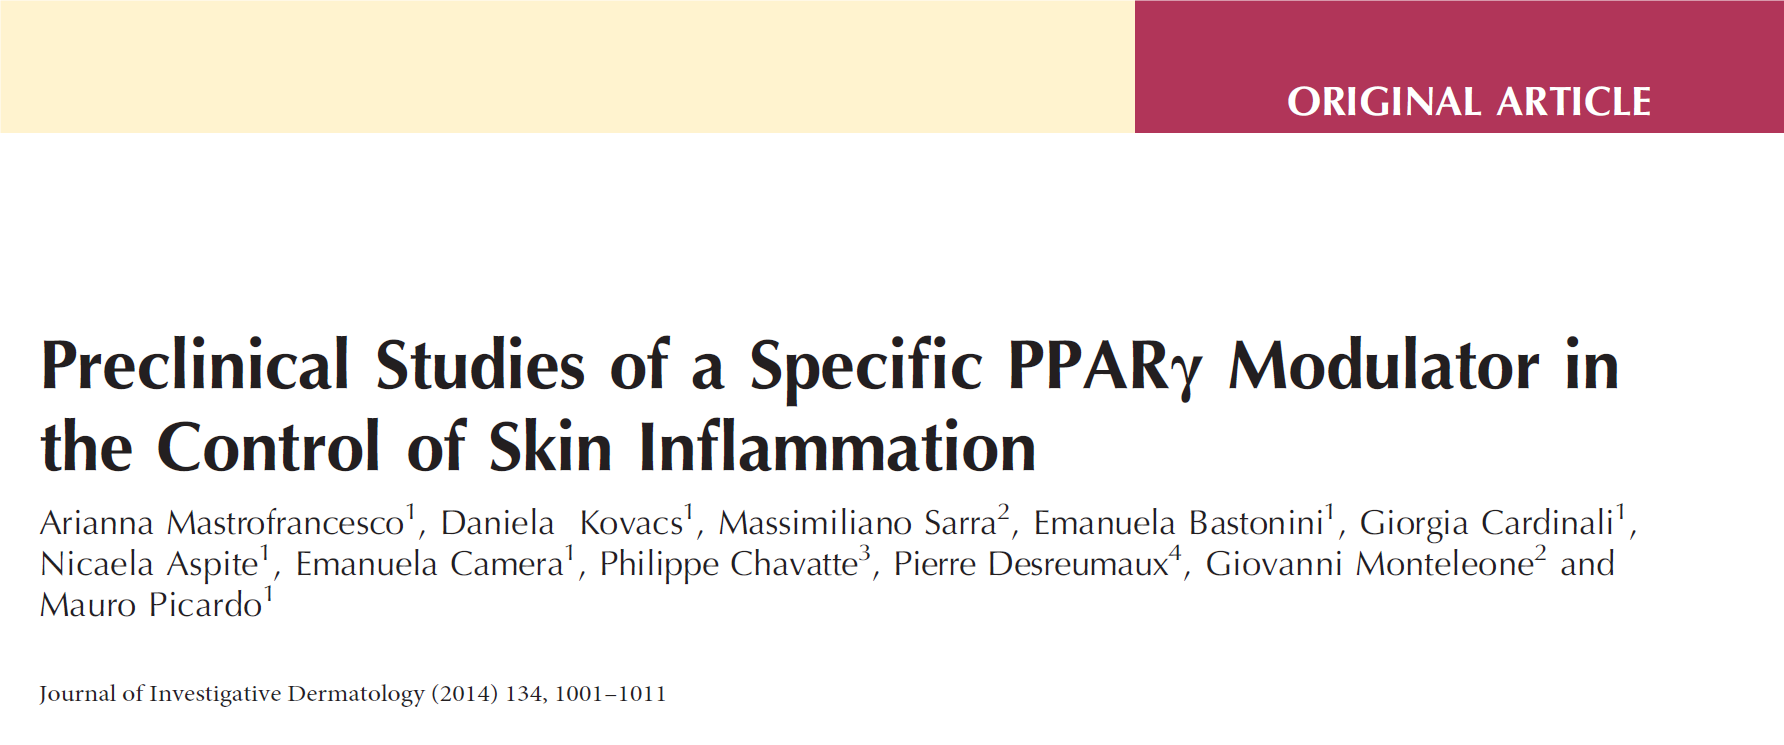 Preclinical Studies of a Specific PPARγ Modulator in the Control of Skin Inflammation